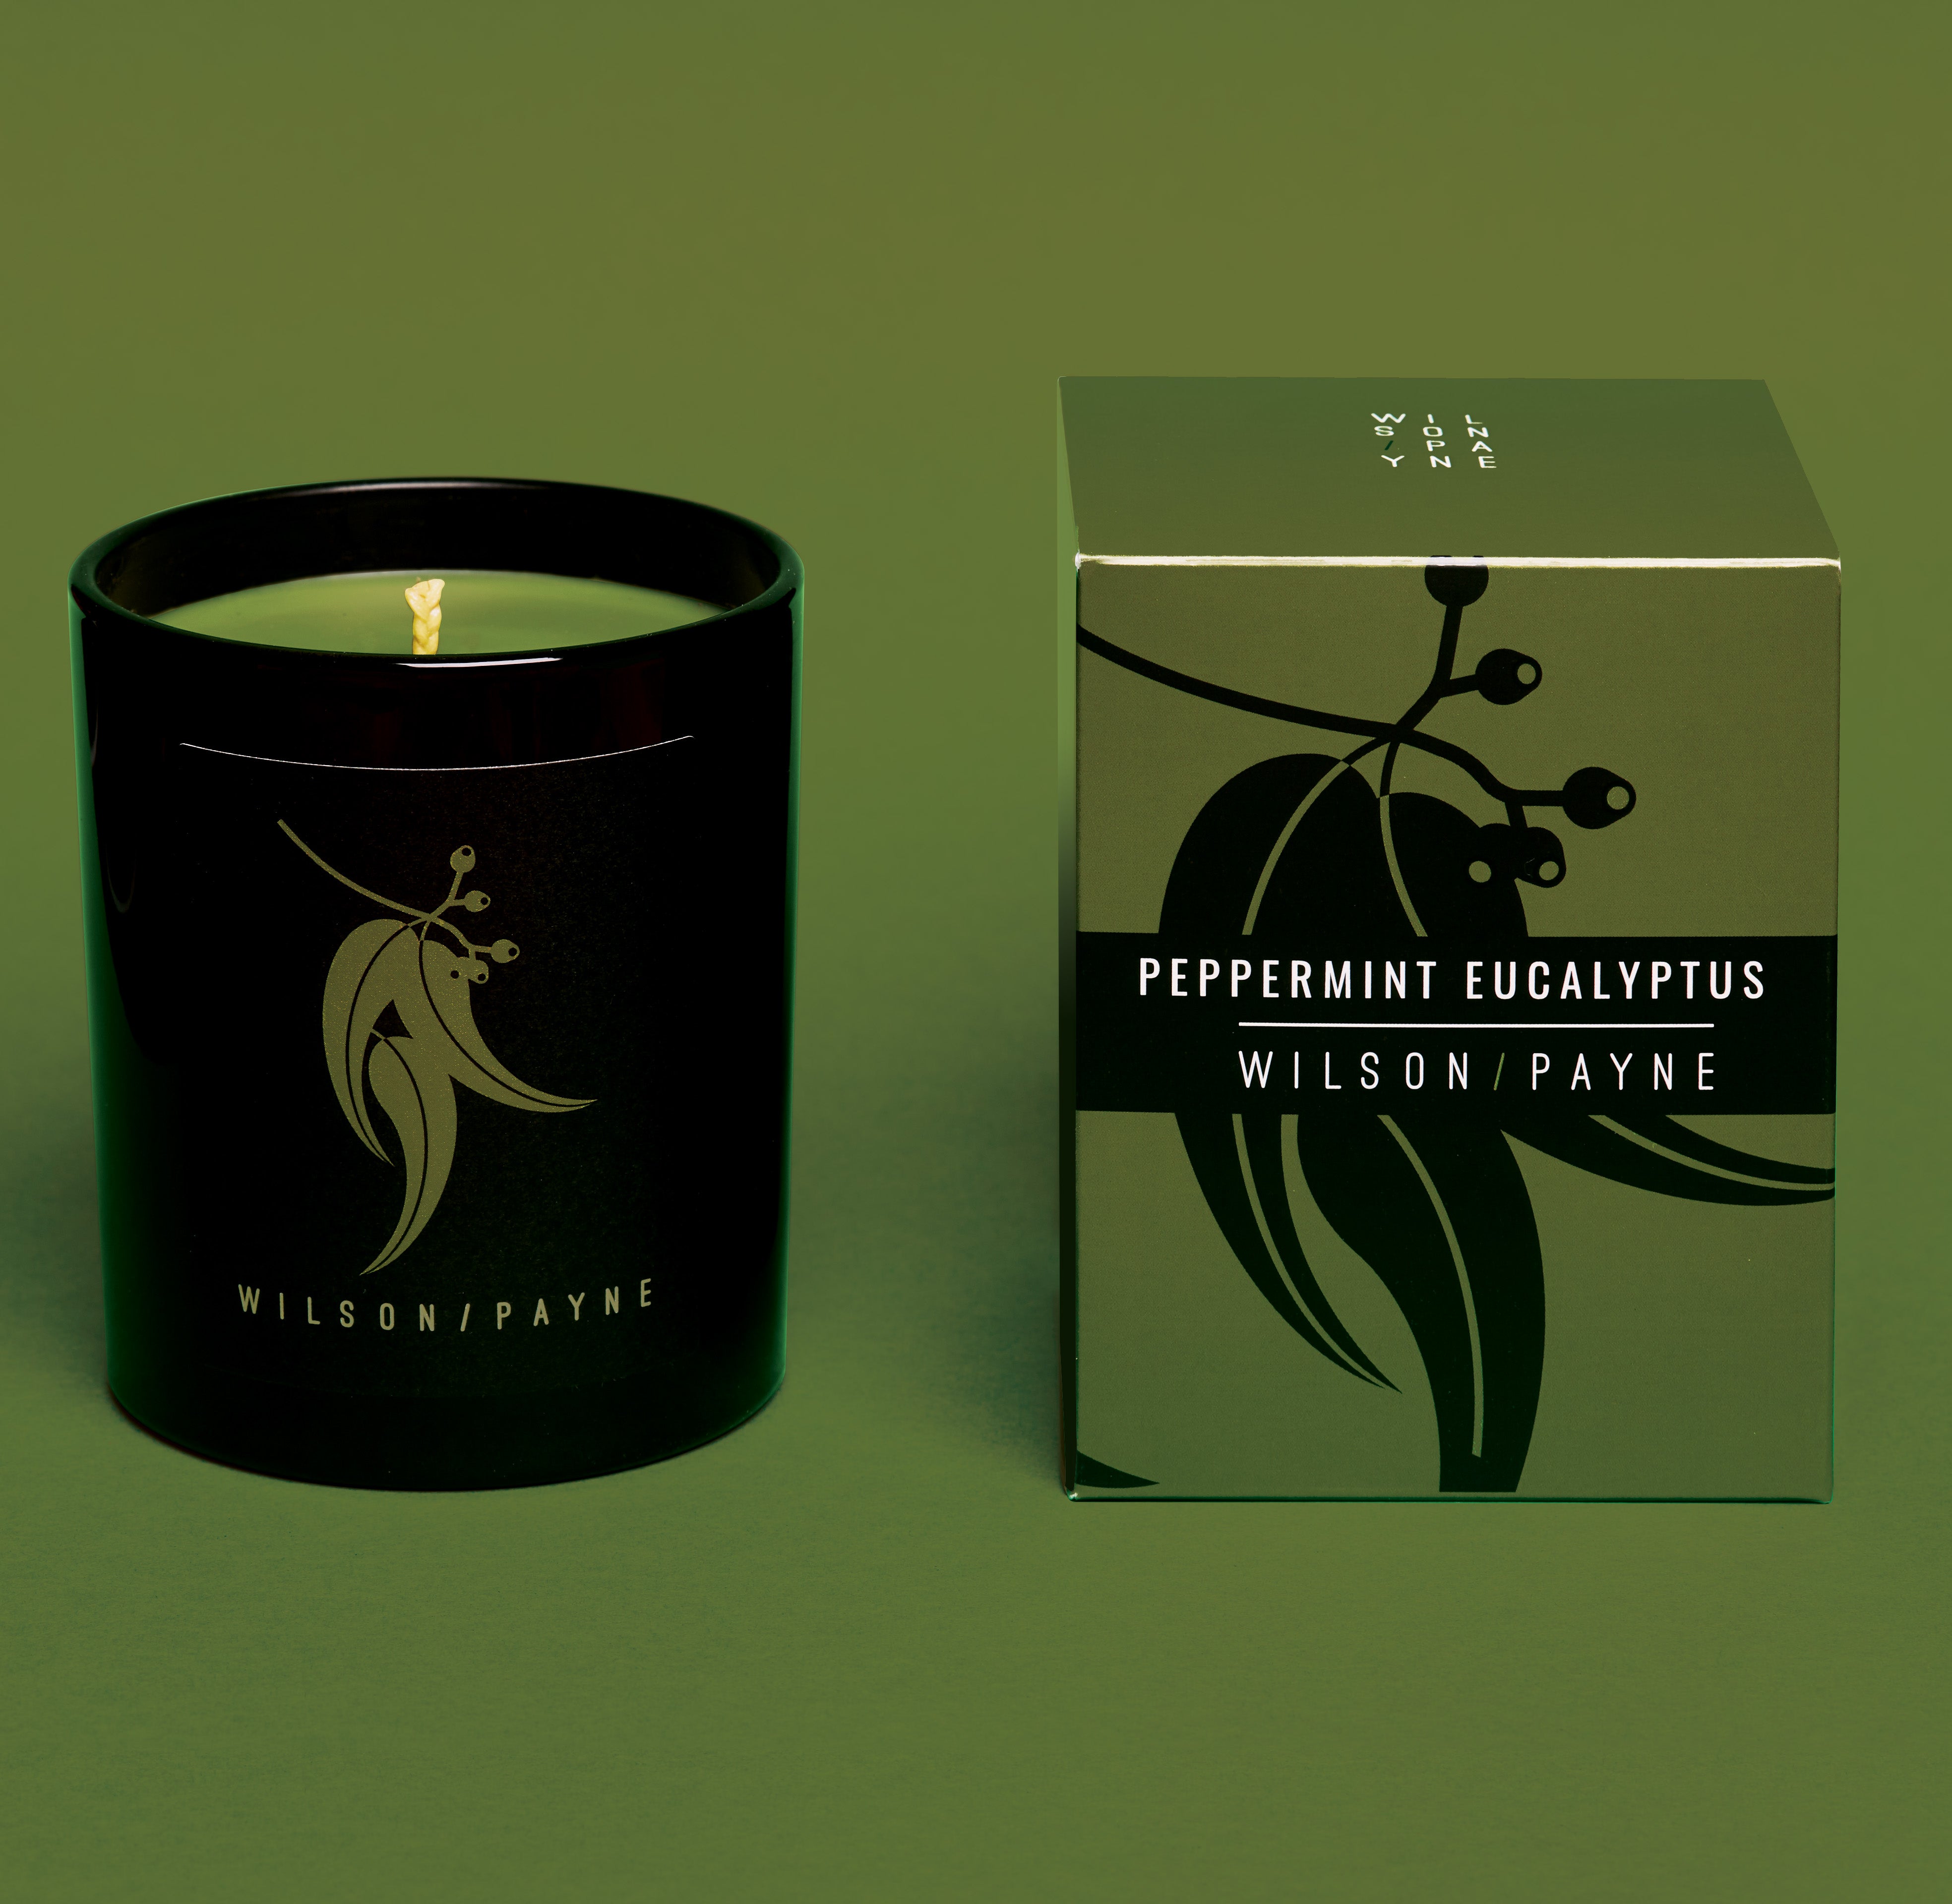 FROM RED EARTH - PEPPERMINT EUCALYPTUS